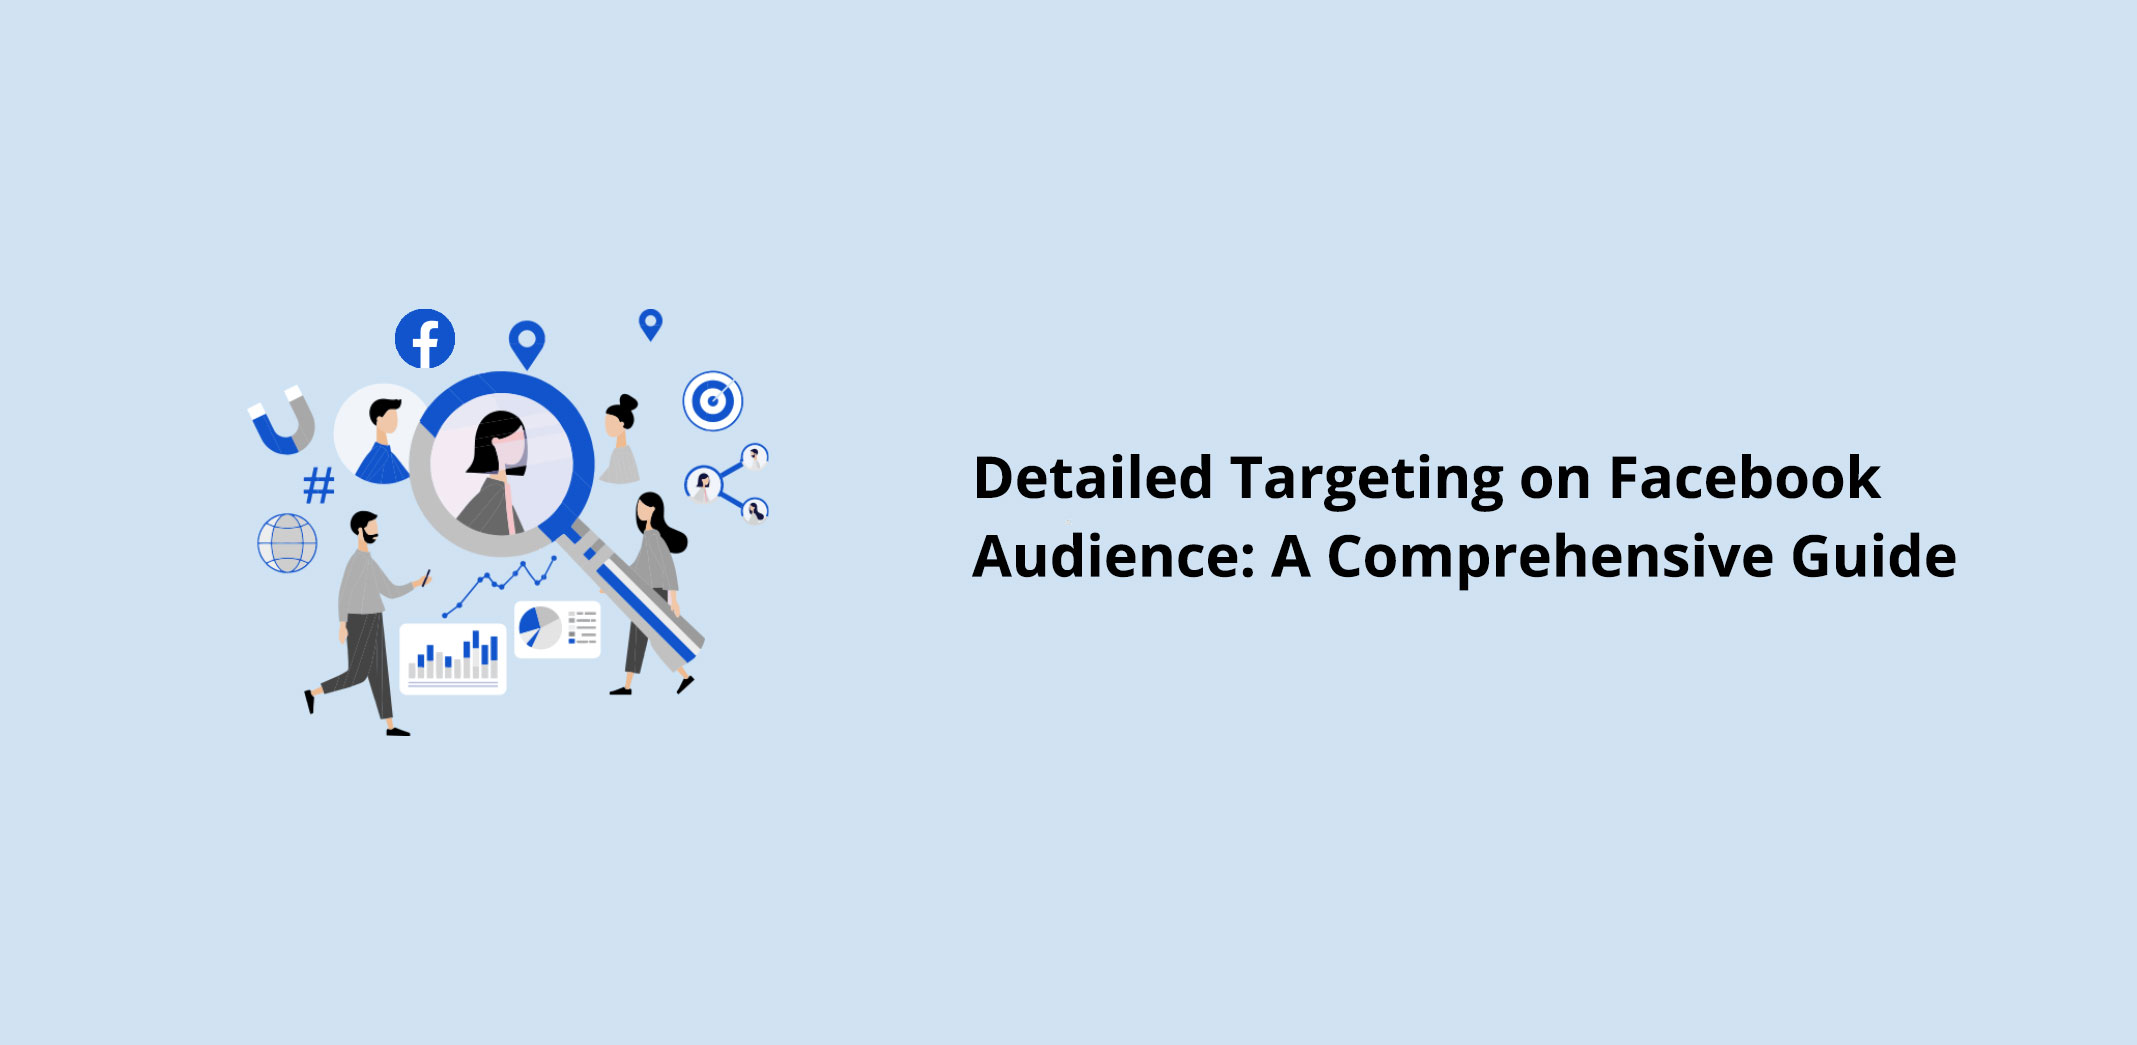 Detailed Targeting on Facebook Audience: A Comprehensive Guide